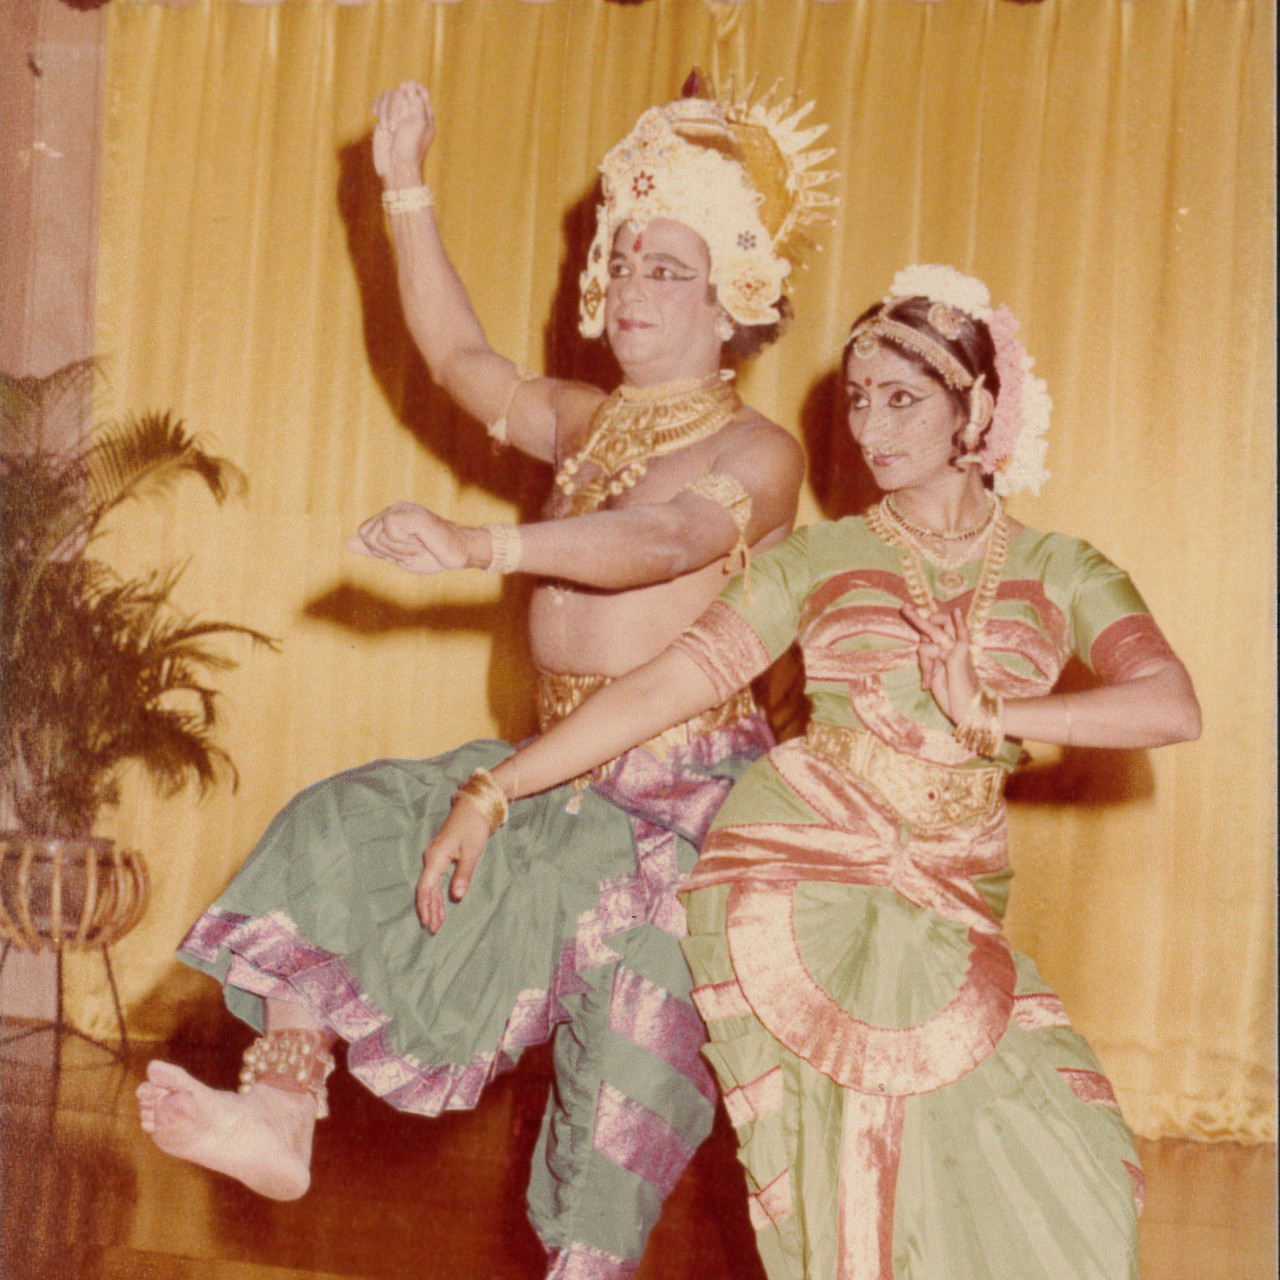 Malaysia's eminent dance masters VK Sivadas and Vatsala Sivadas, two of the early founders of the academy. – Picture courtesy of the Temple of Fine Arts